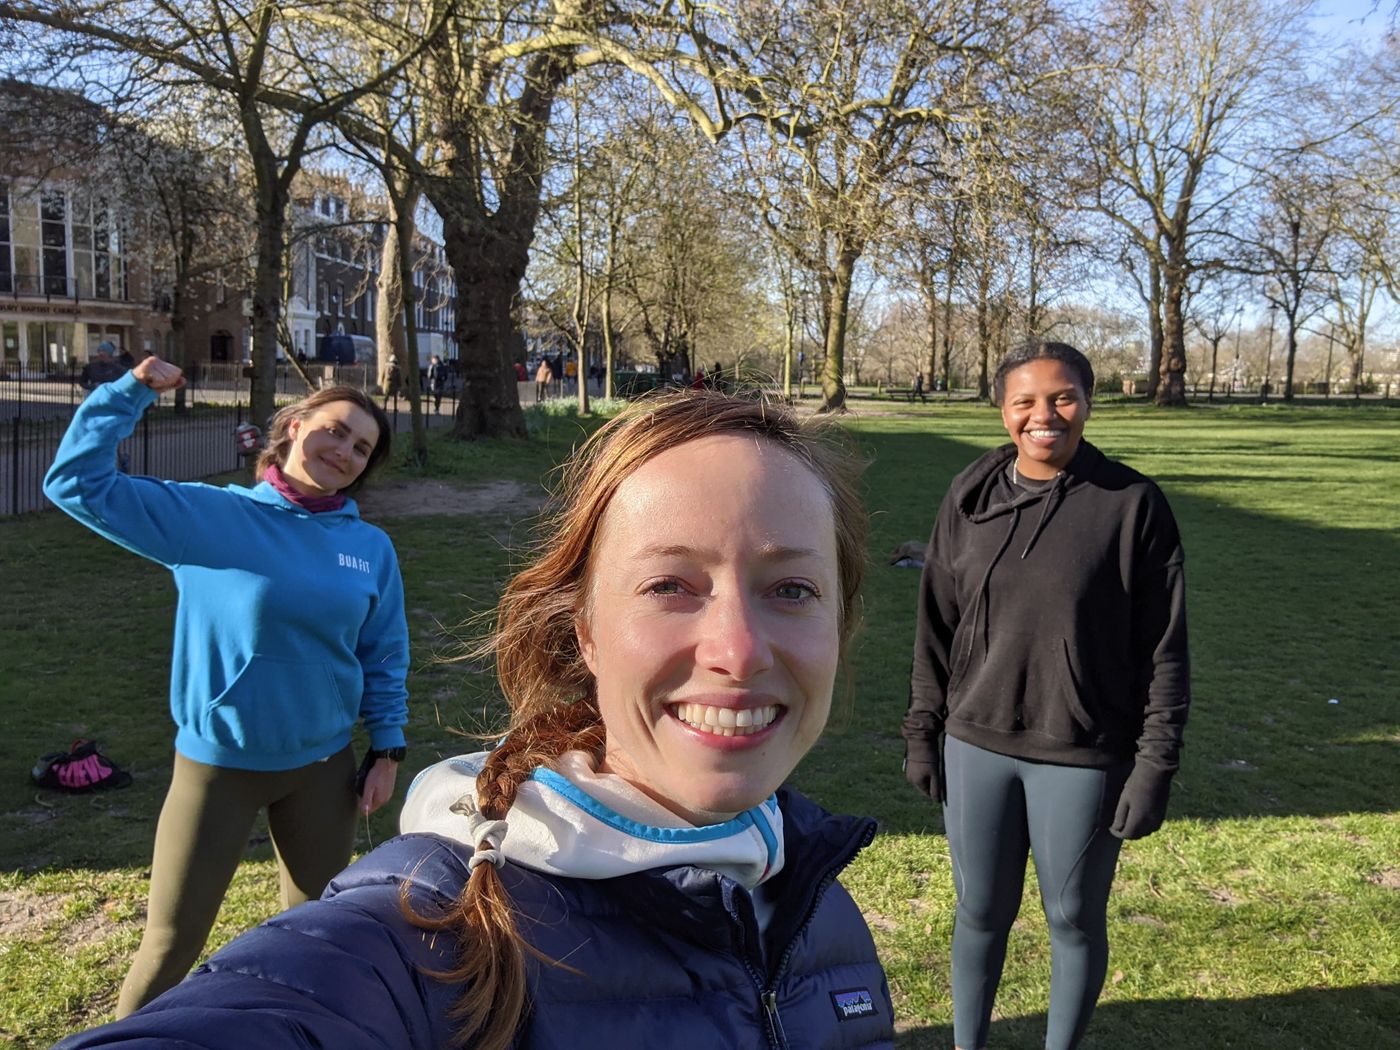 It always feels better after booty 🍑 boot camp! 

Great morning sesh with the Highbury Fields Crew! 🥳 

HAPPY TUESDAY TO ALL!